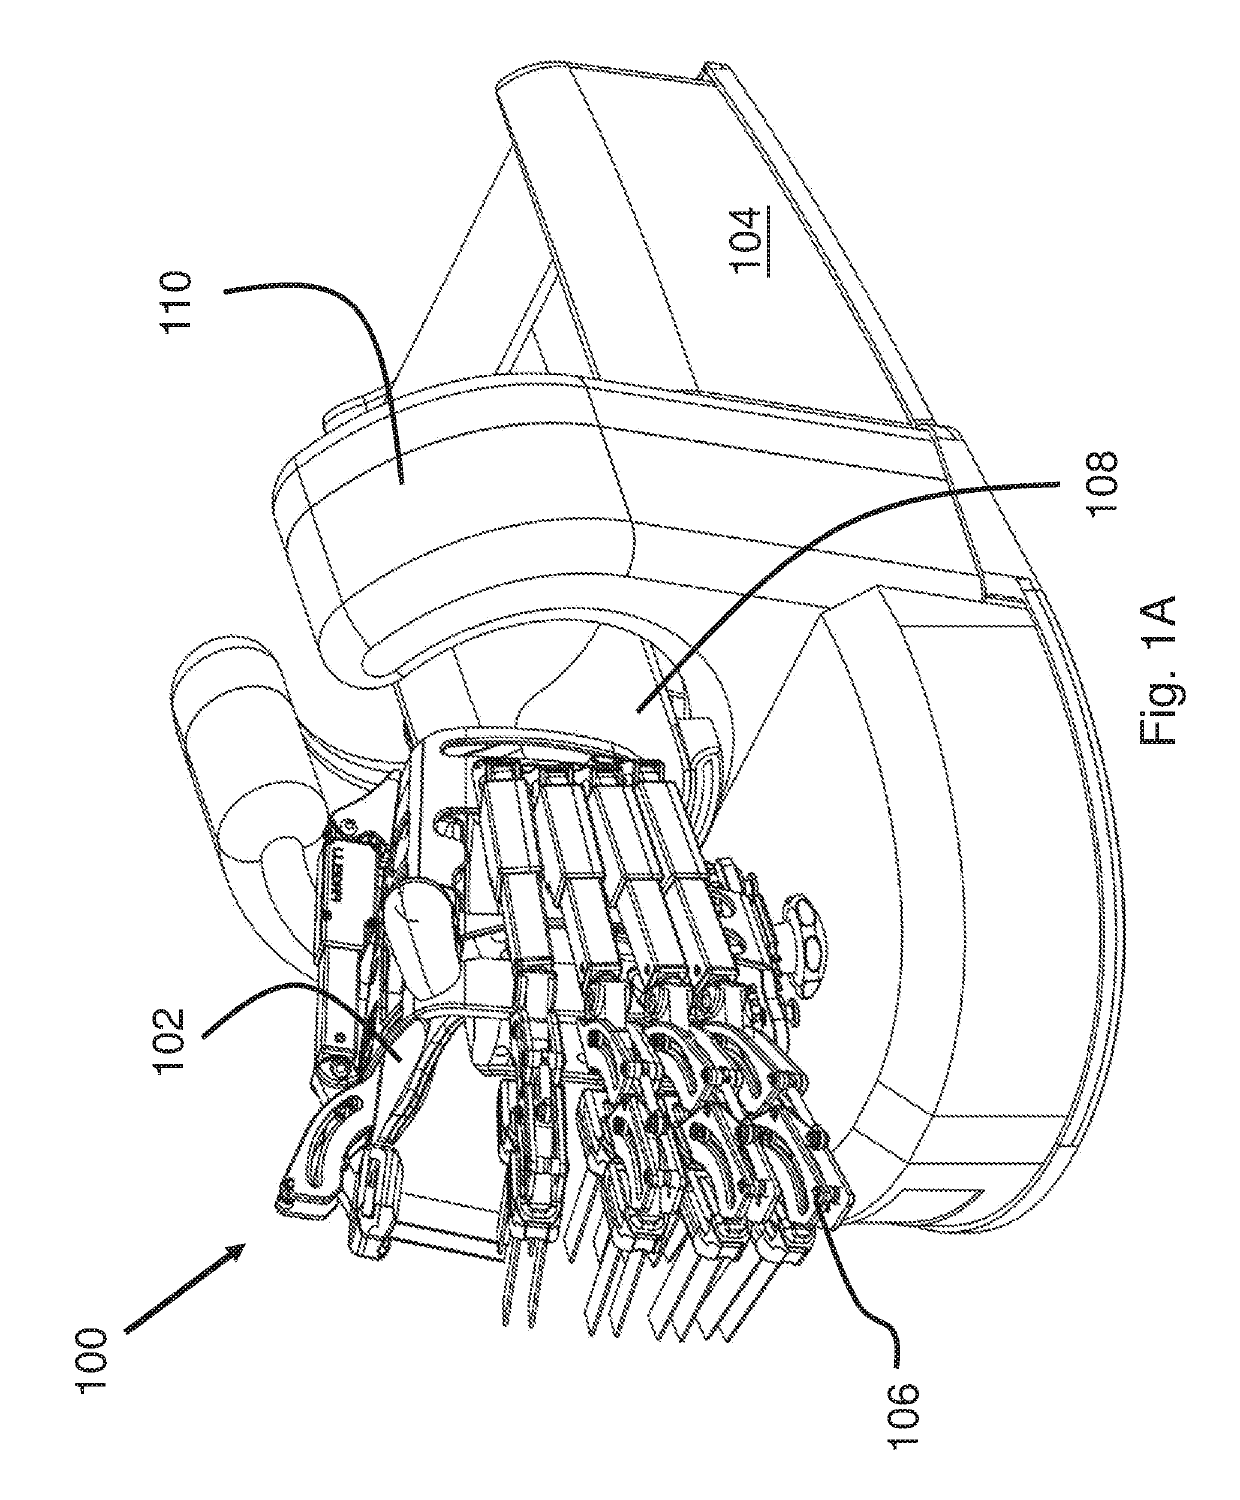 A Power Assistive Device For Hand Rehabilitation And A Method of Using The Same